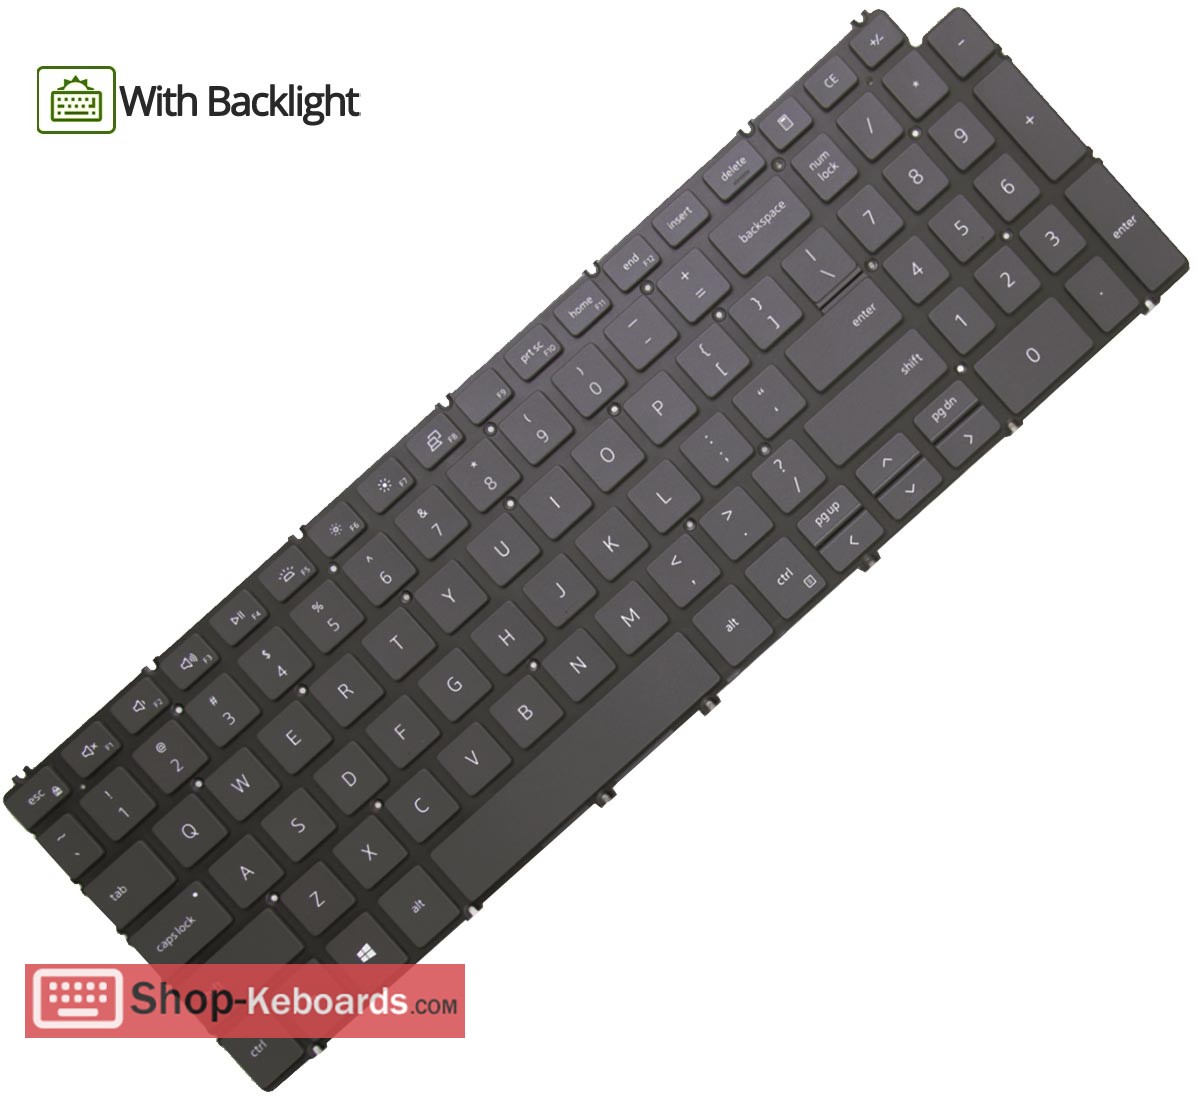 Dell INSPIRON 7501 Keyboard replacement